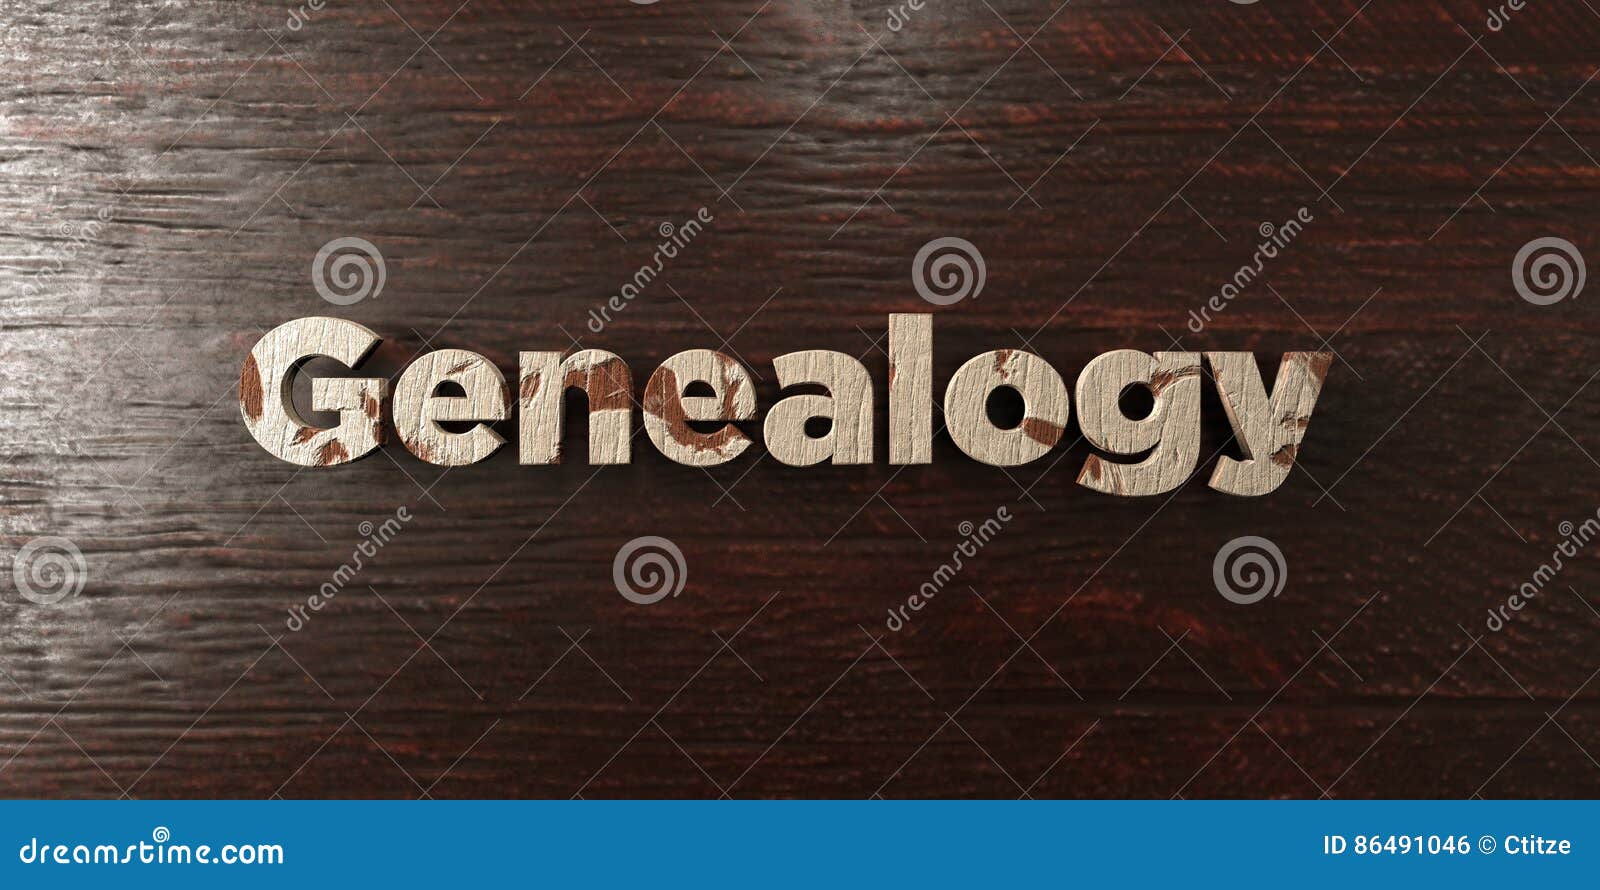 genealogy - grungy wooden headline on maple - 3d rendered royalty free stock image